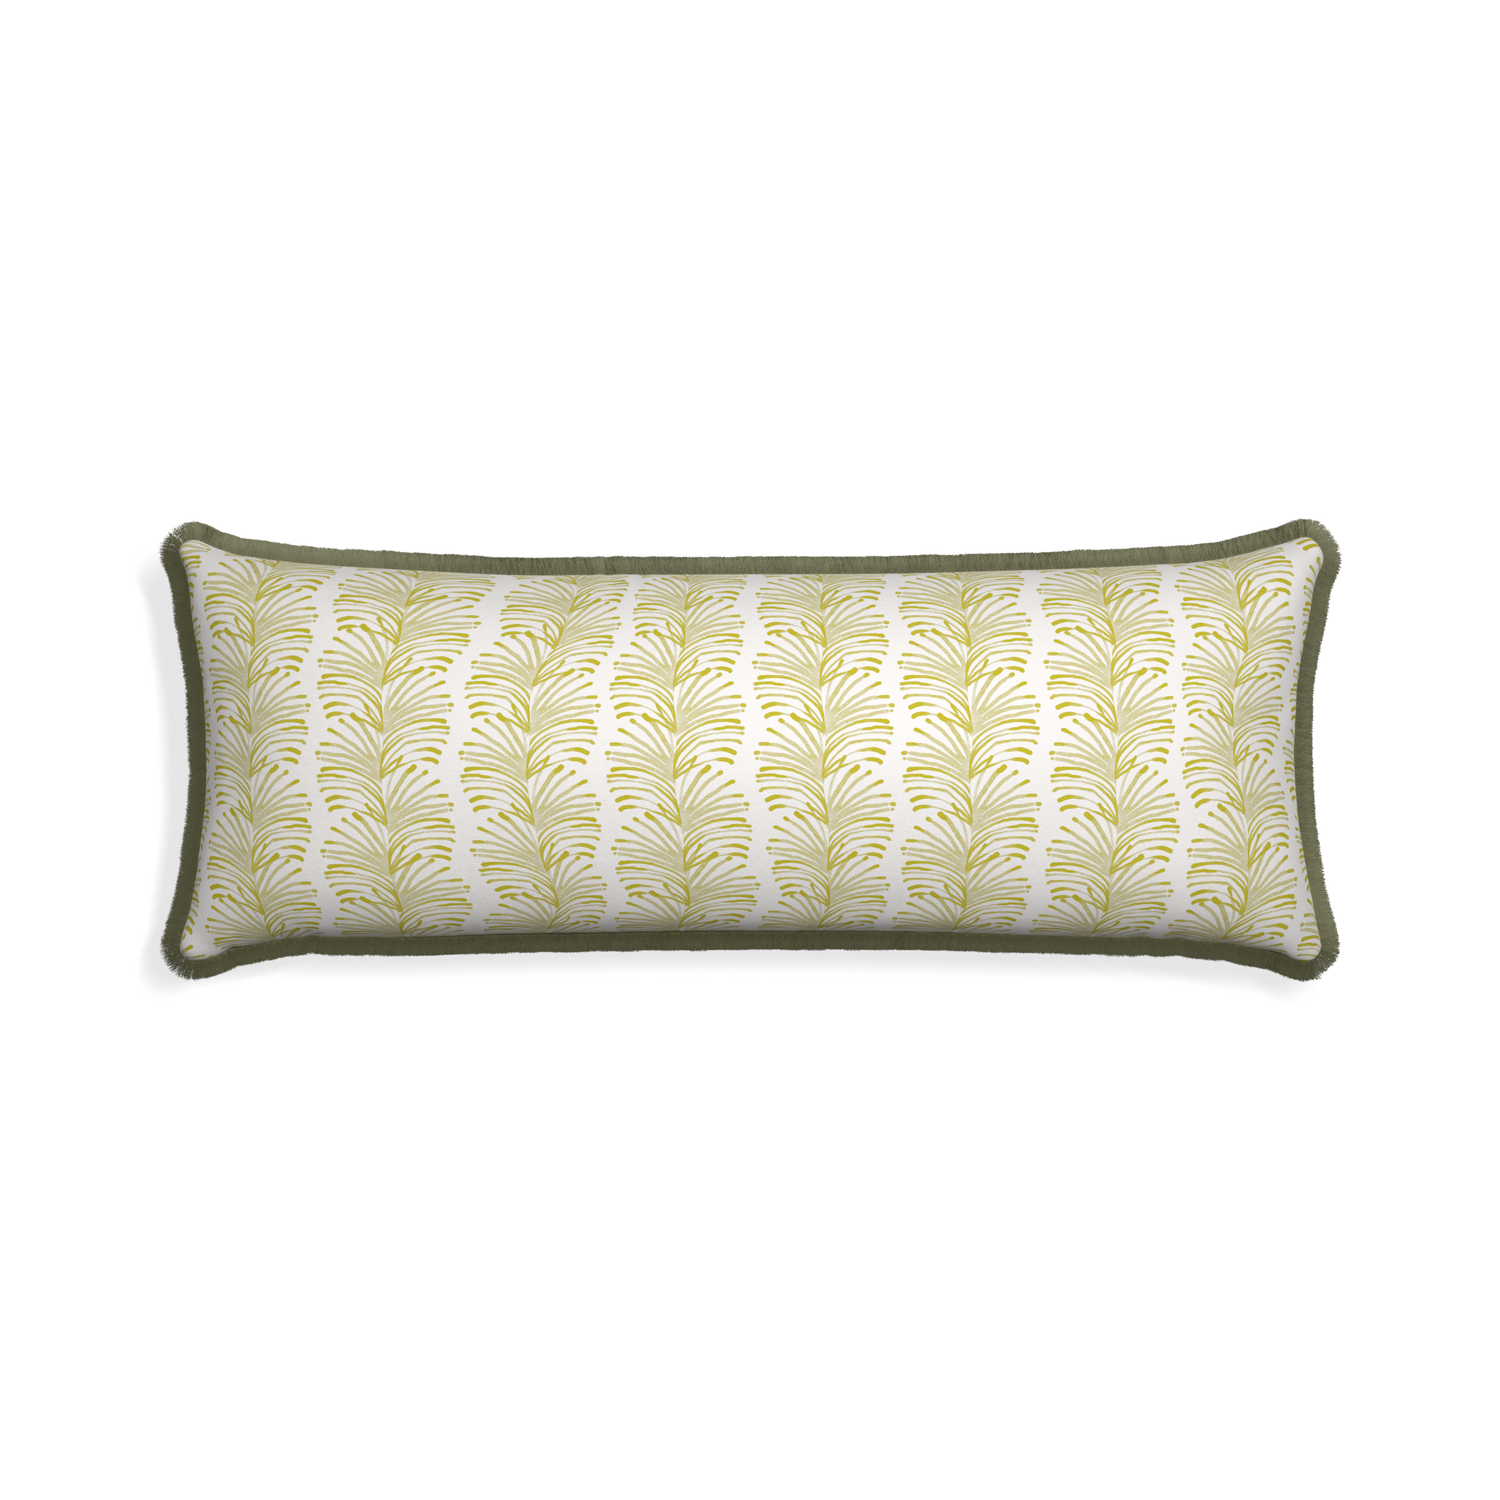 Xl-lumbar emma chartreuse custom yellow stripe chartreusepillow with sage fringe on white background